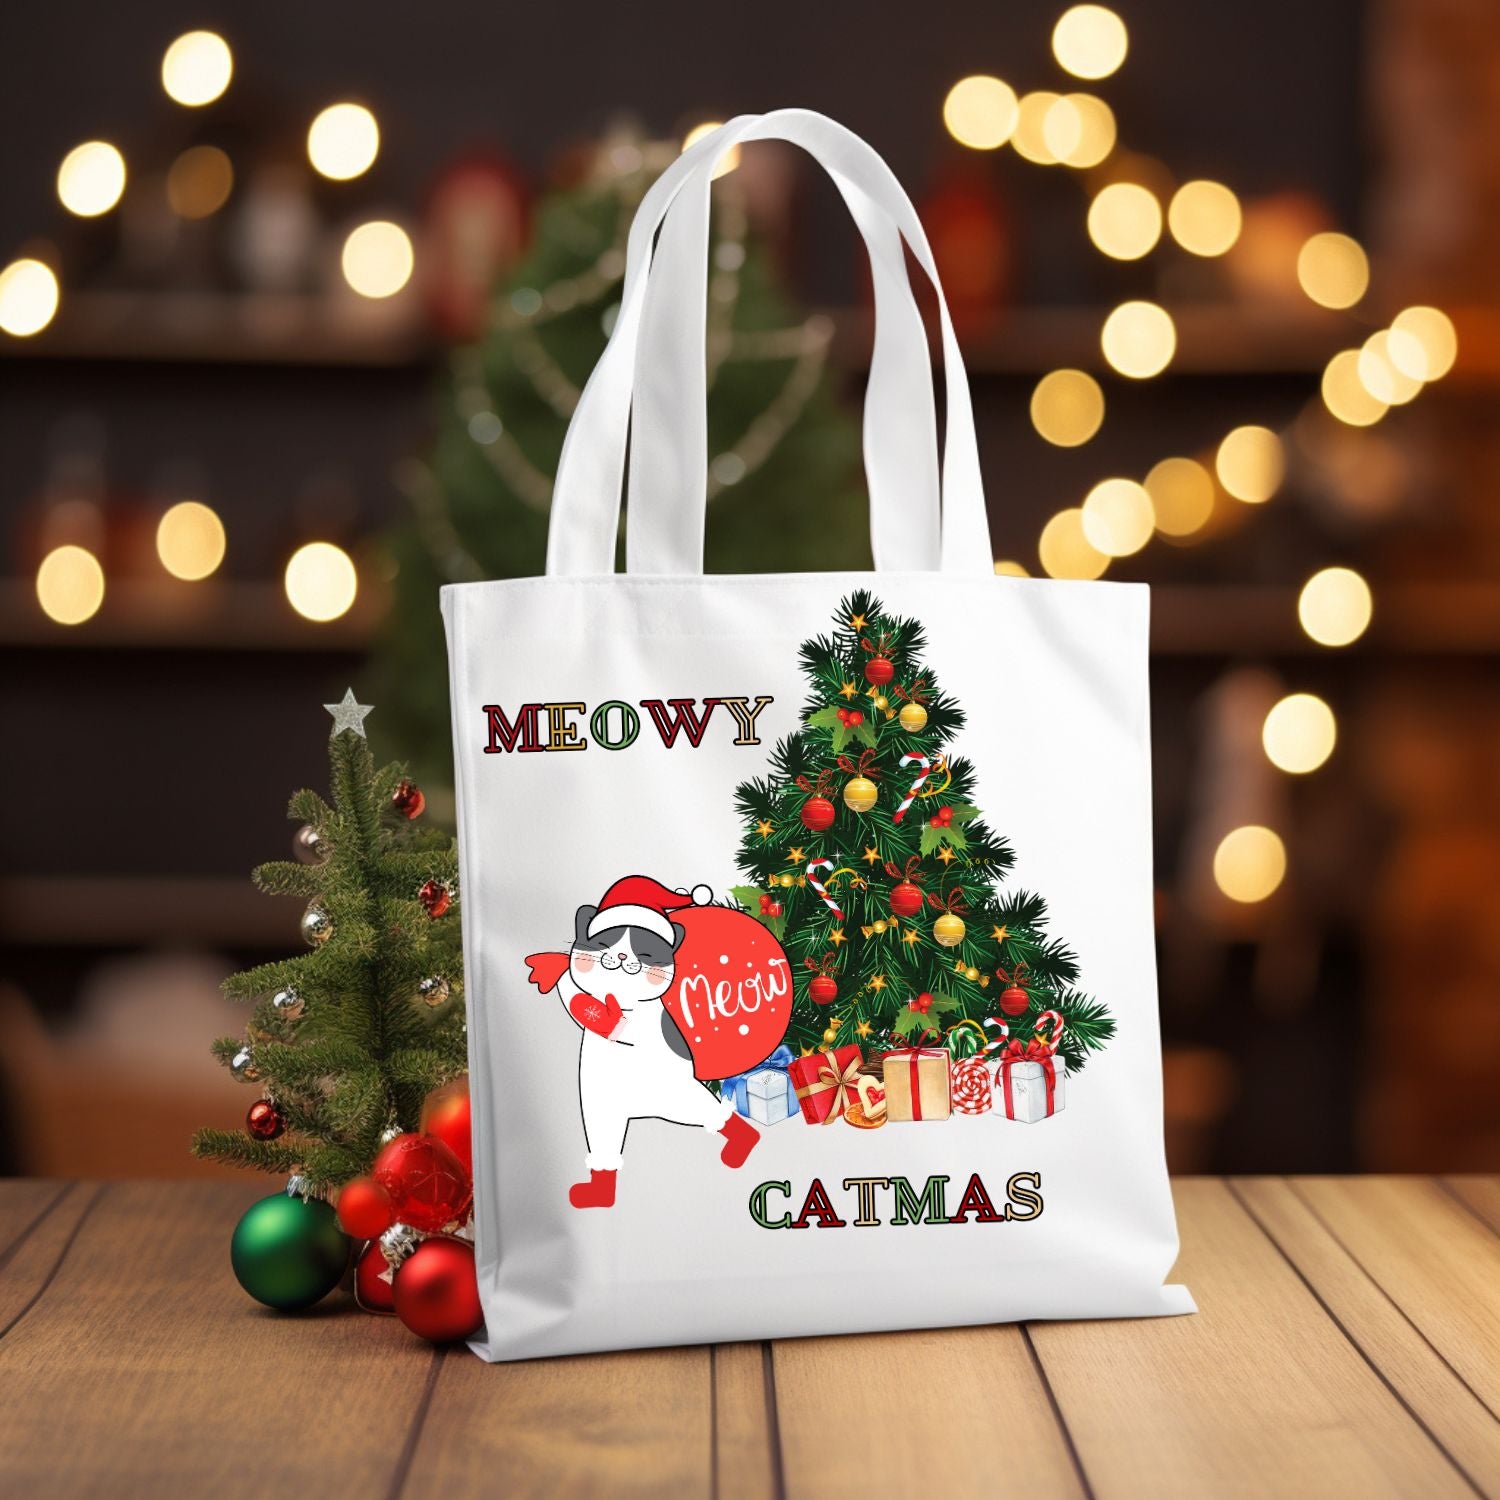 Meowy Catmas Tote Bag, Funny Black Cat Totes, Christmas Lights Cat Bags, Christmas Bags Accessories   